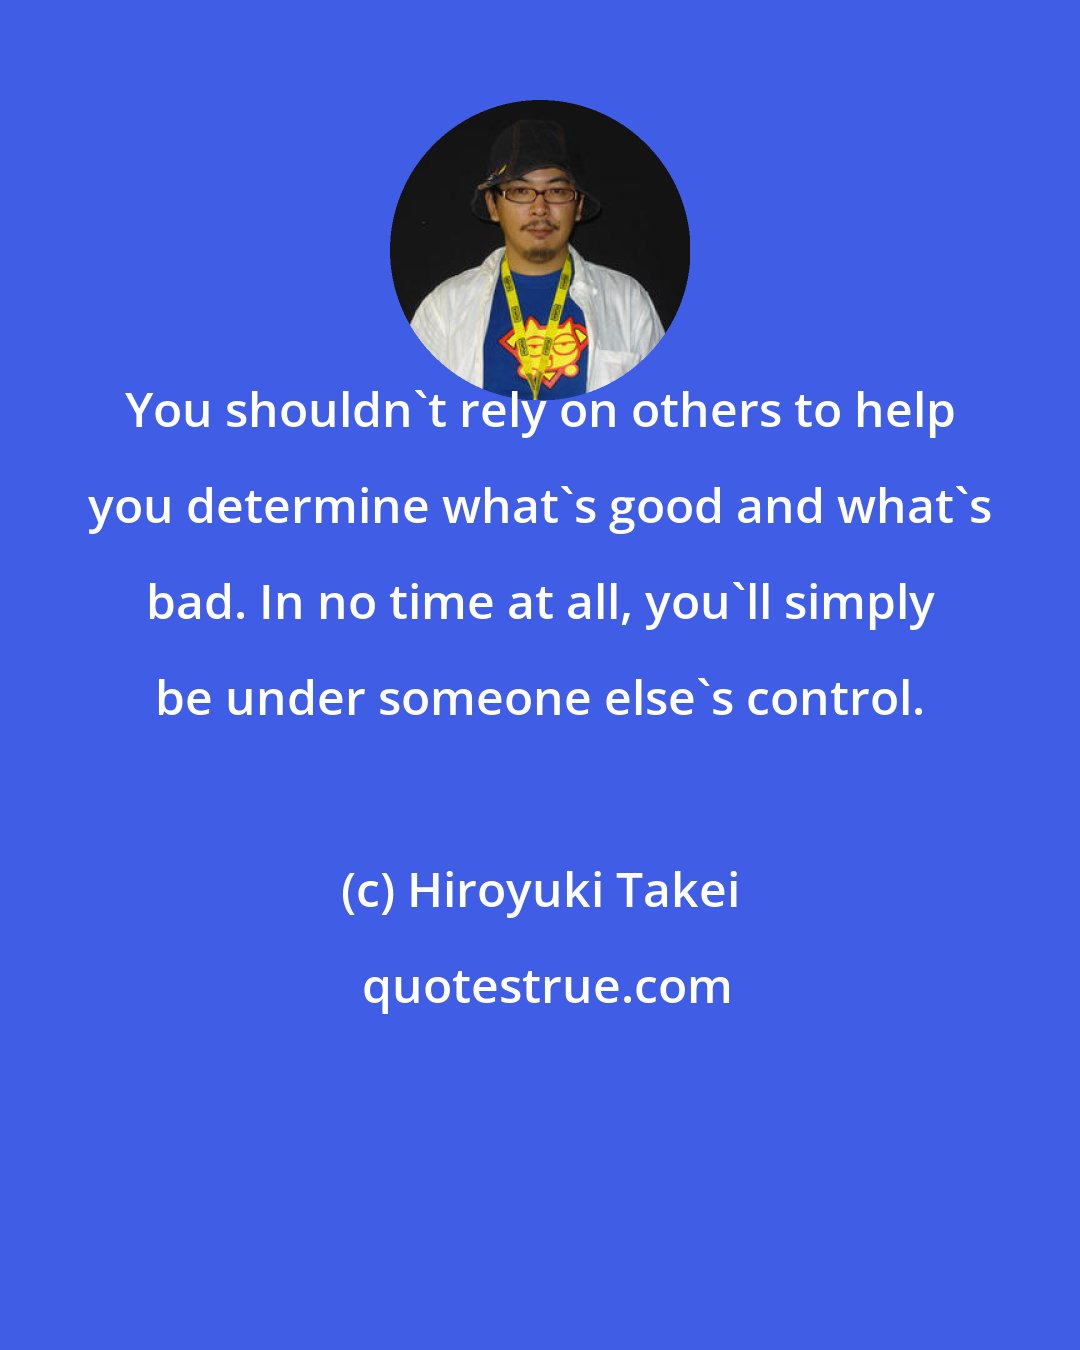 Hiroyuki Takei: You shouldn't rely on others to help you determine what's good and what's bad. In no time at all, you'll simply be under someone else's control.